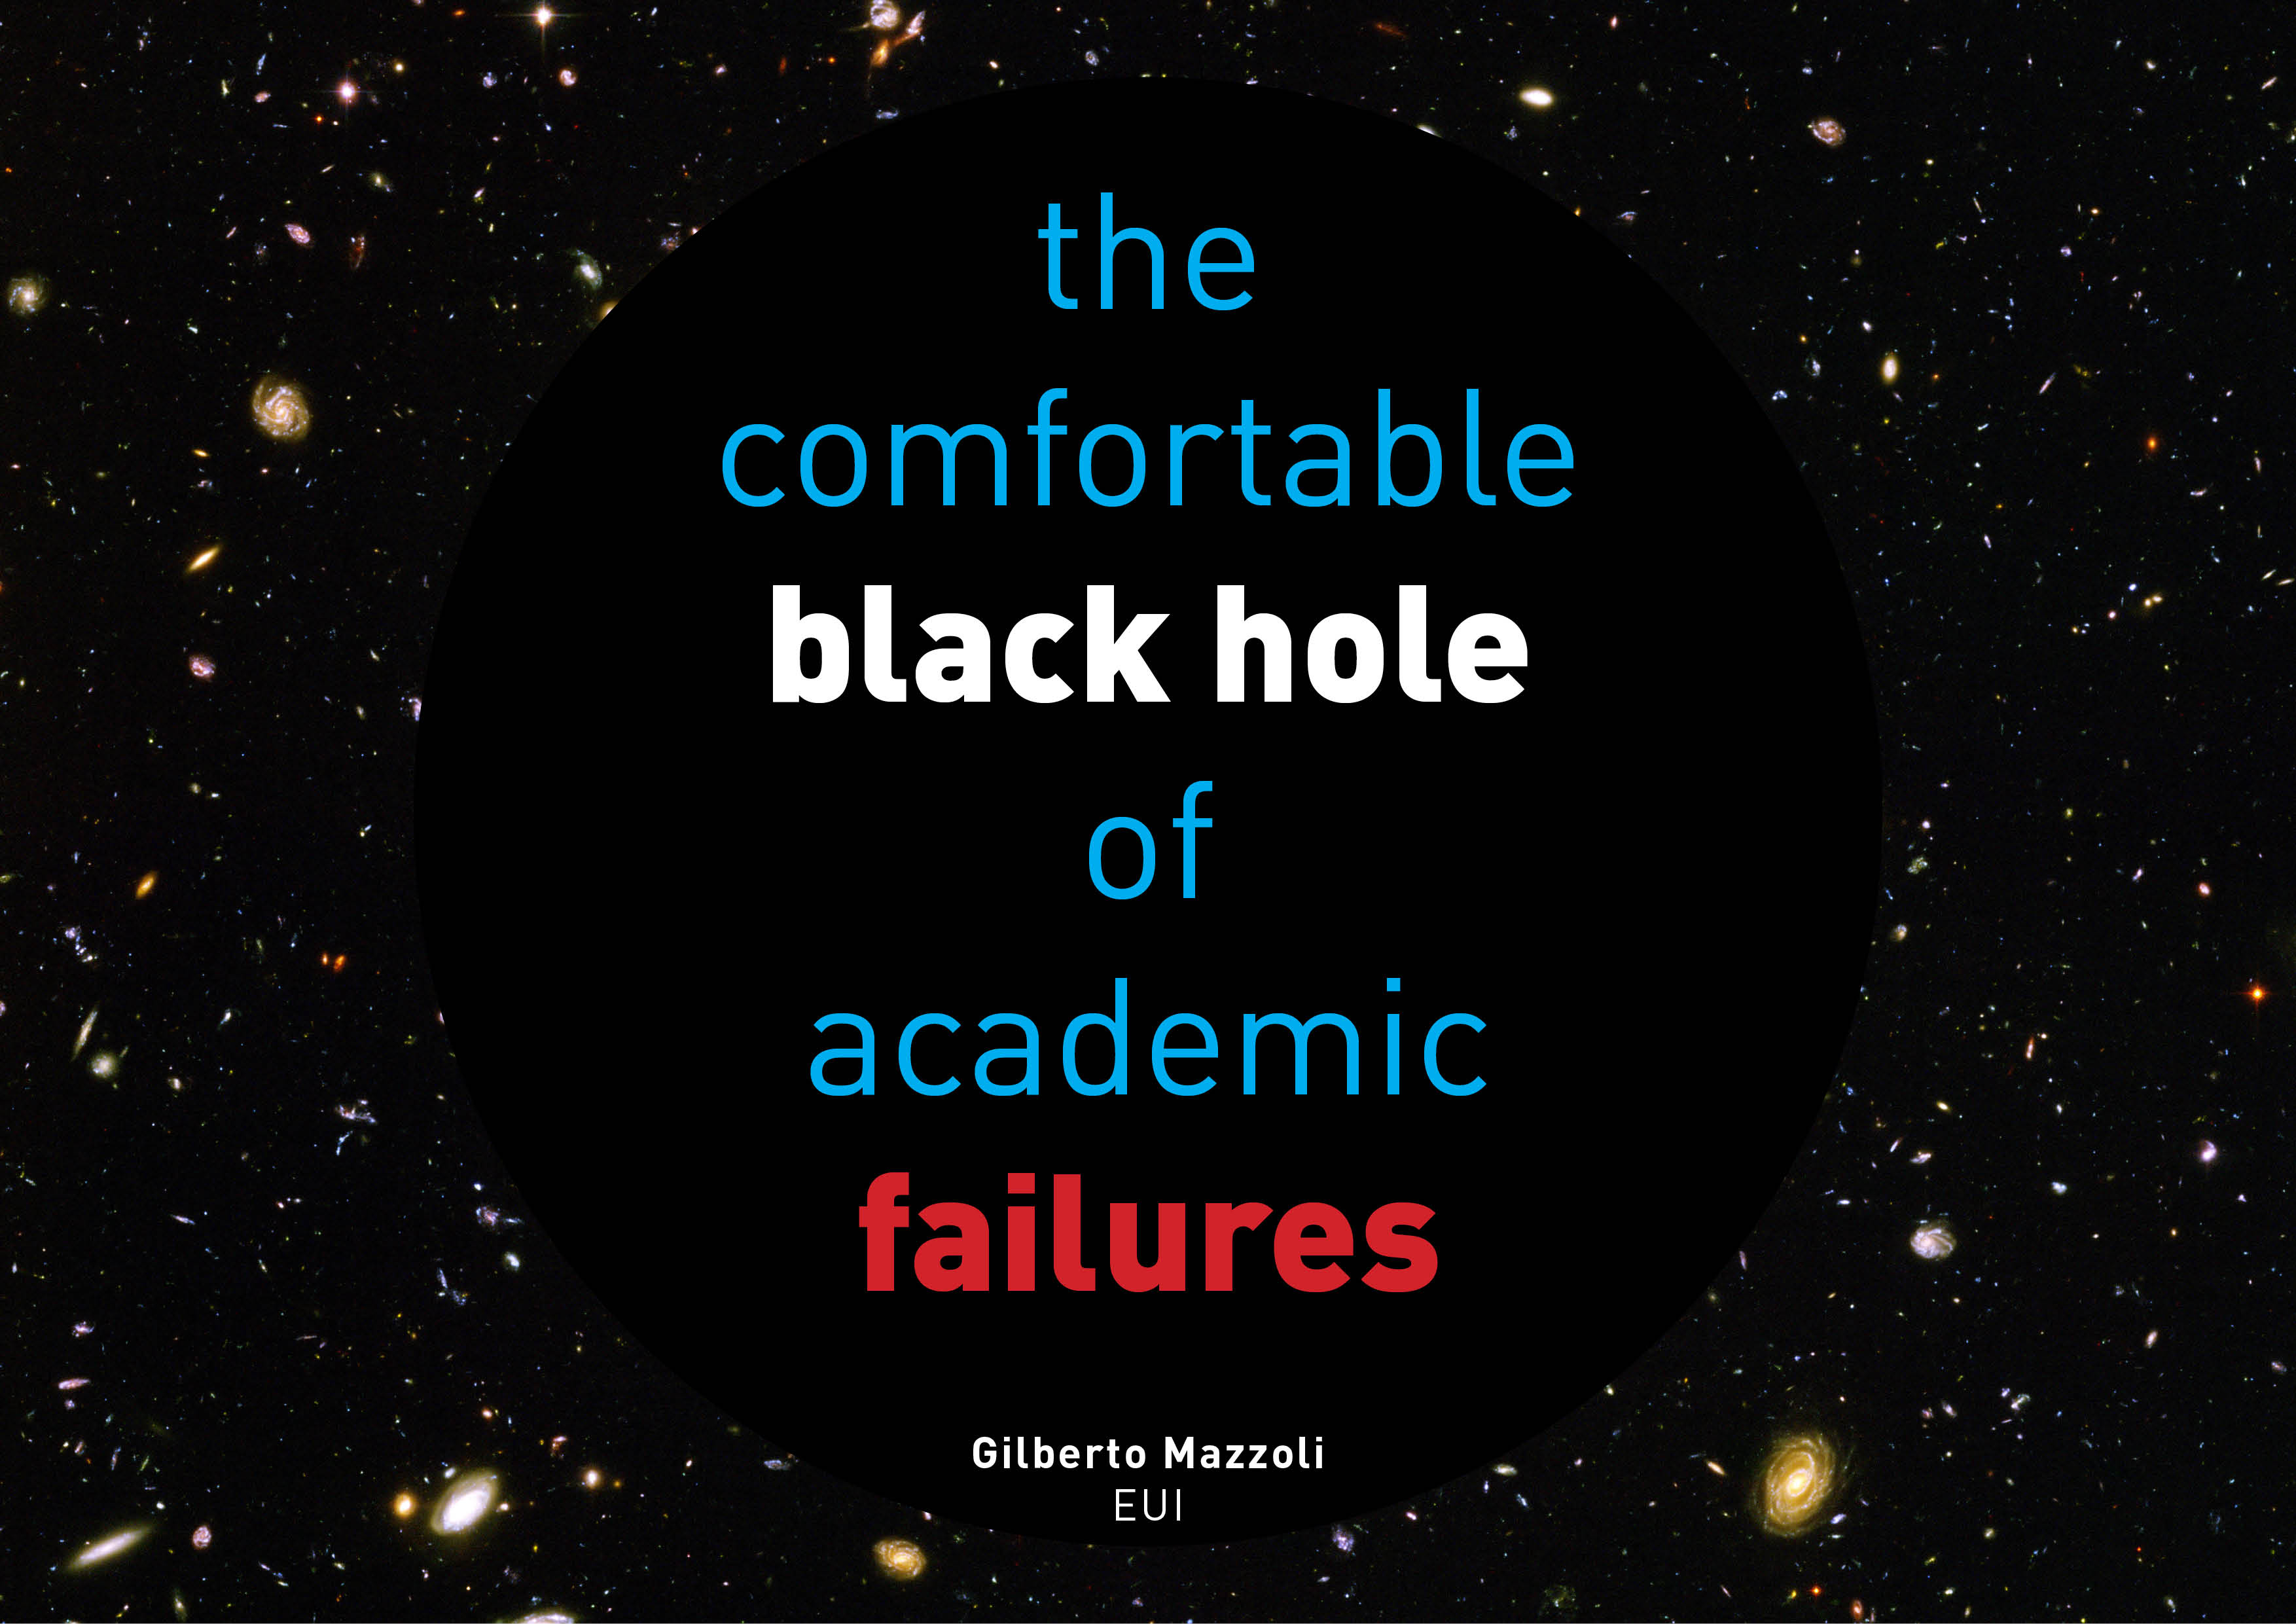 The comfortable black hole of academic failures. 2019